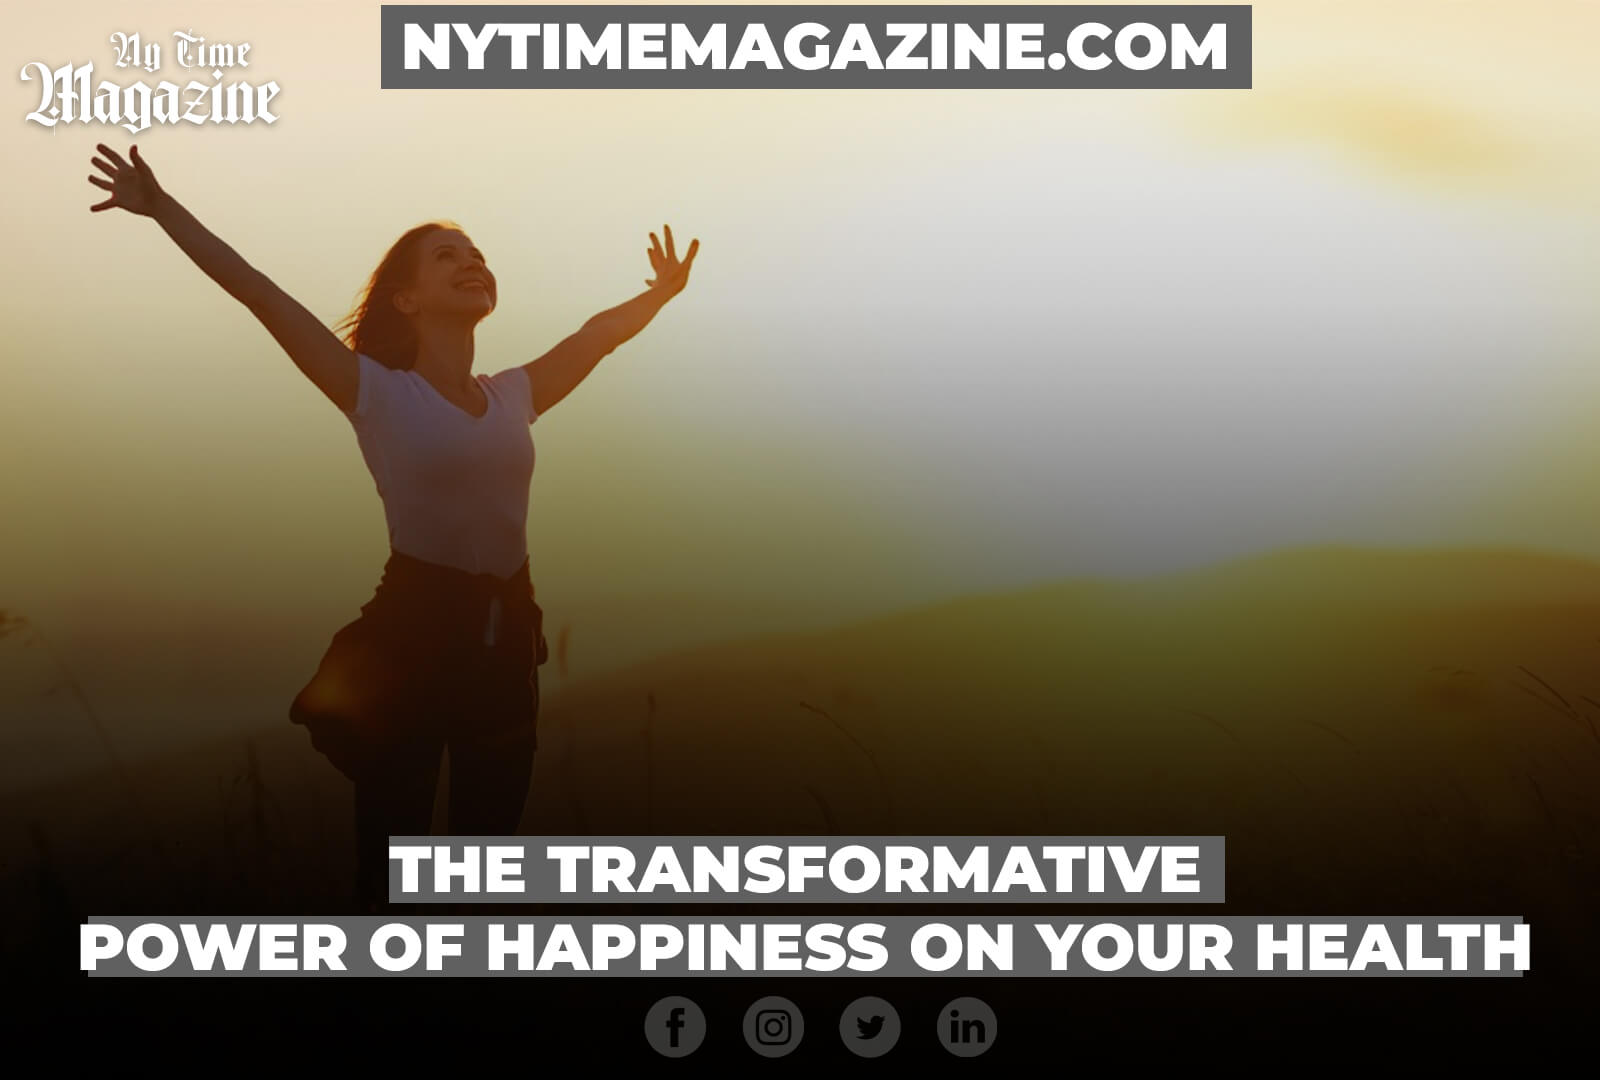 The Transformative Power of Happiness on Your Health